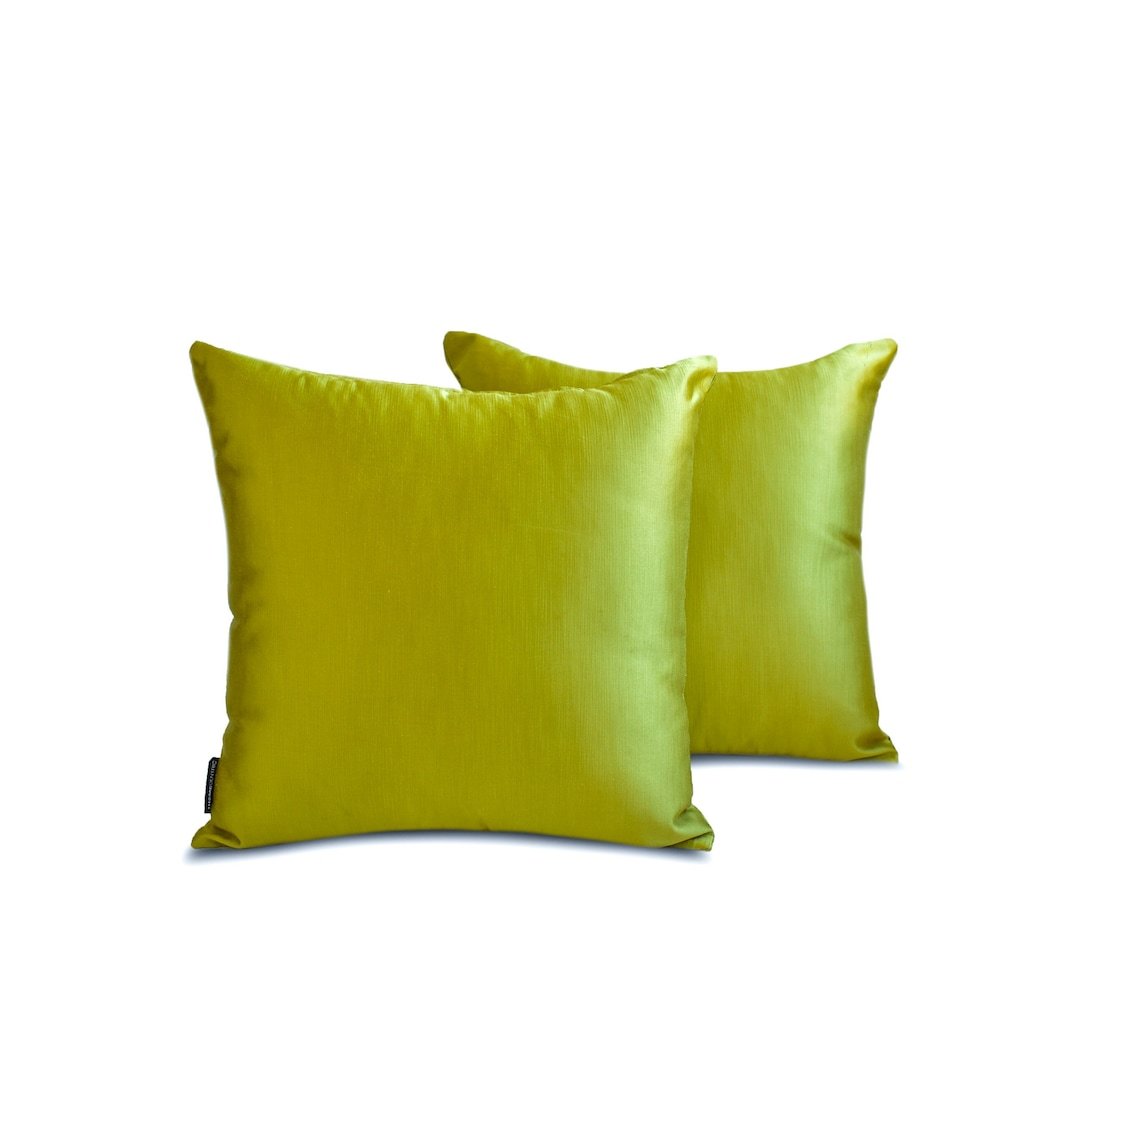 Primary image for Pillow Cases Chartreuse Set of 2, Satin Solid - Chartreuse Slub Satin